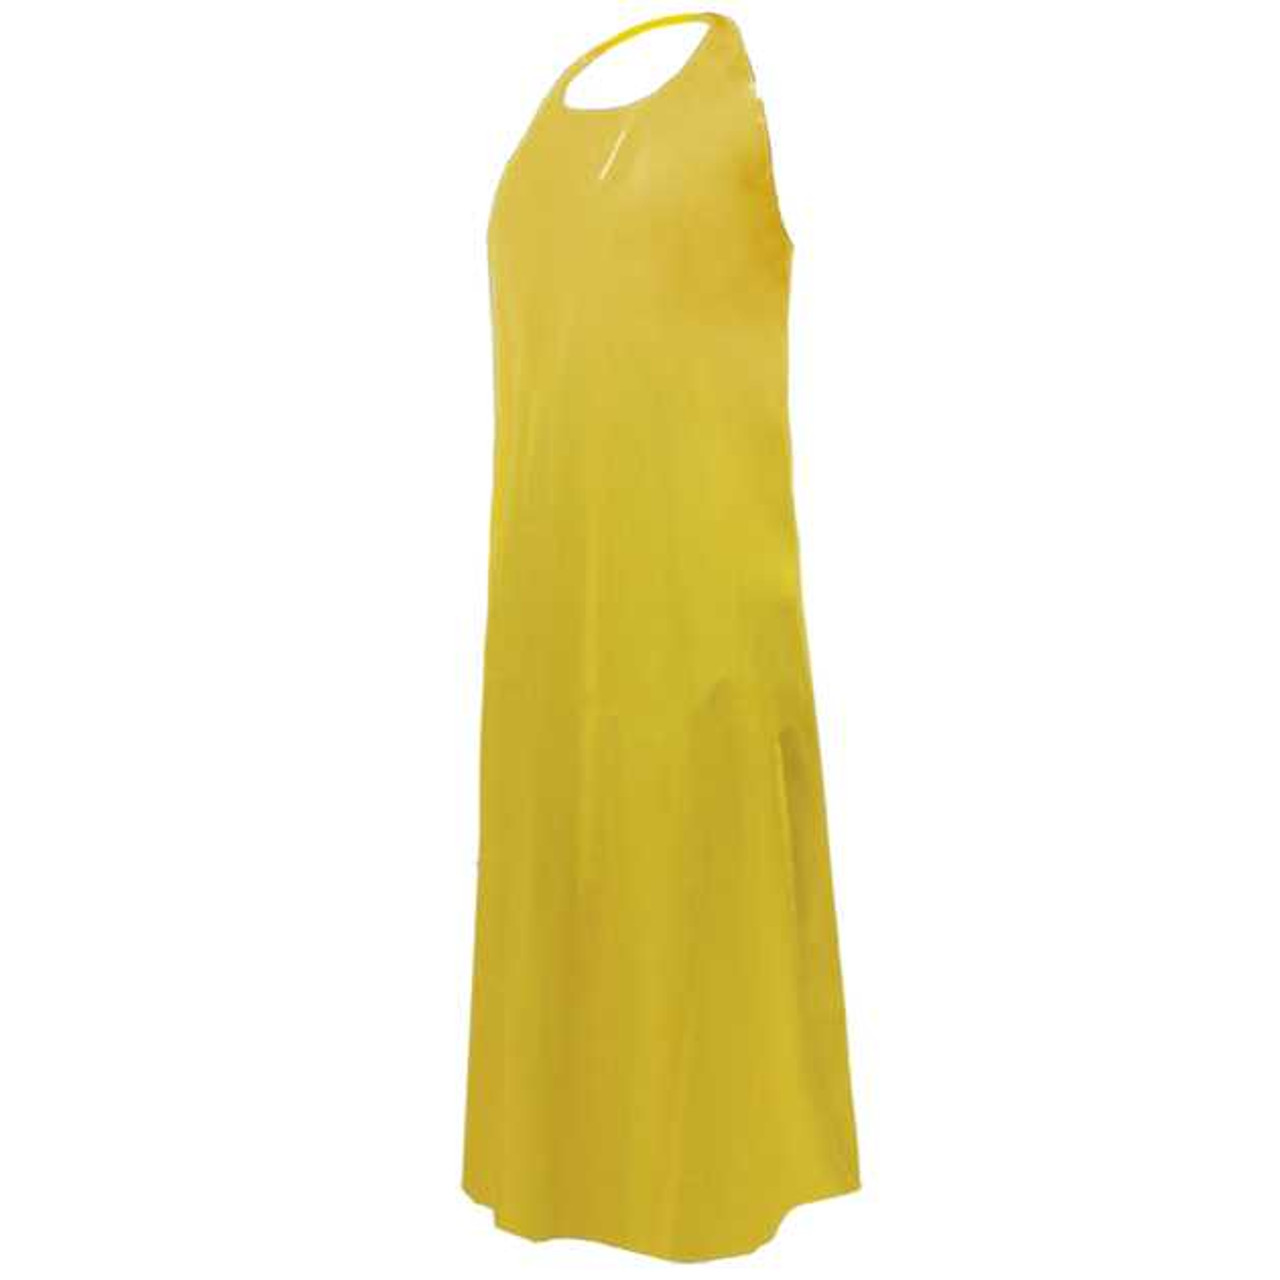 Ronco Care™ PEA2, Polyethylene (PE) Apron - 0.75 mil, Available in White, Blue, or Yellow (1,000 aprons / case)